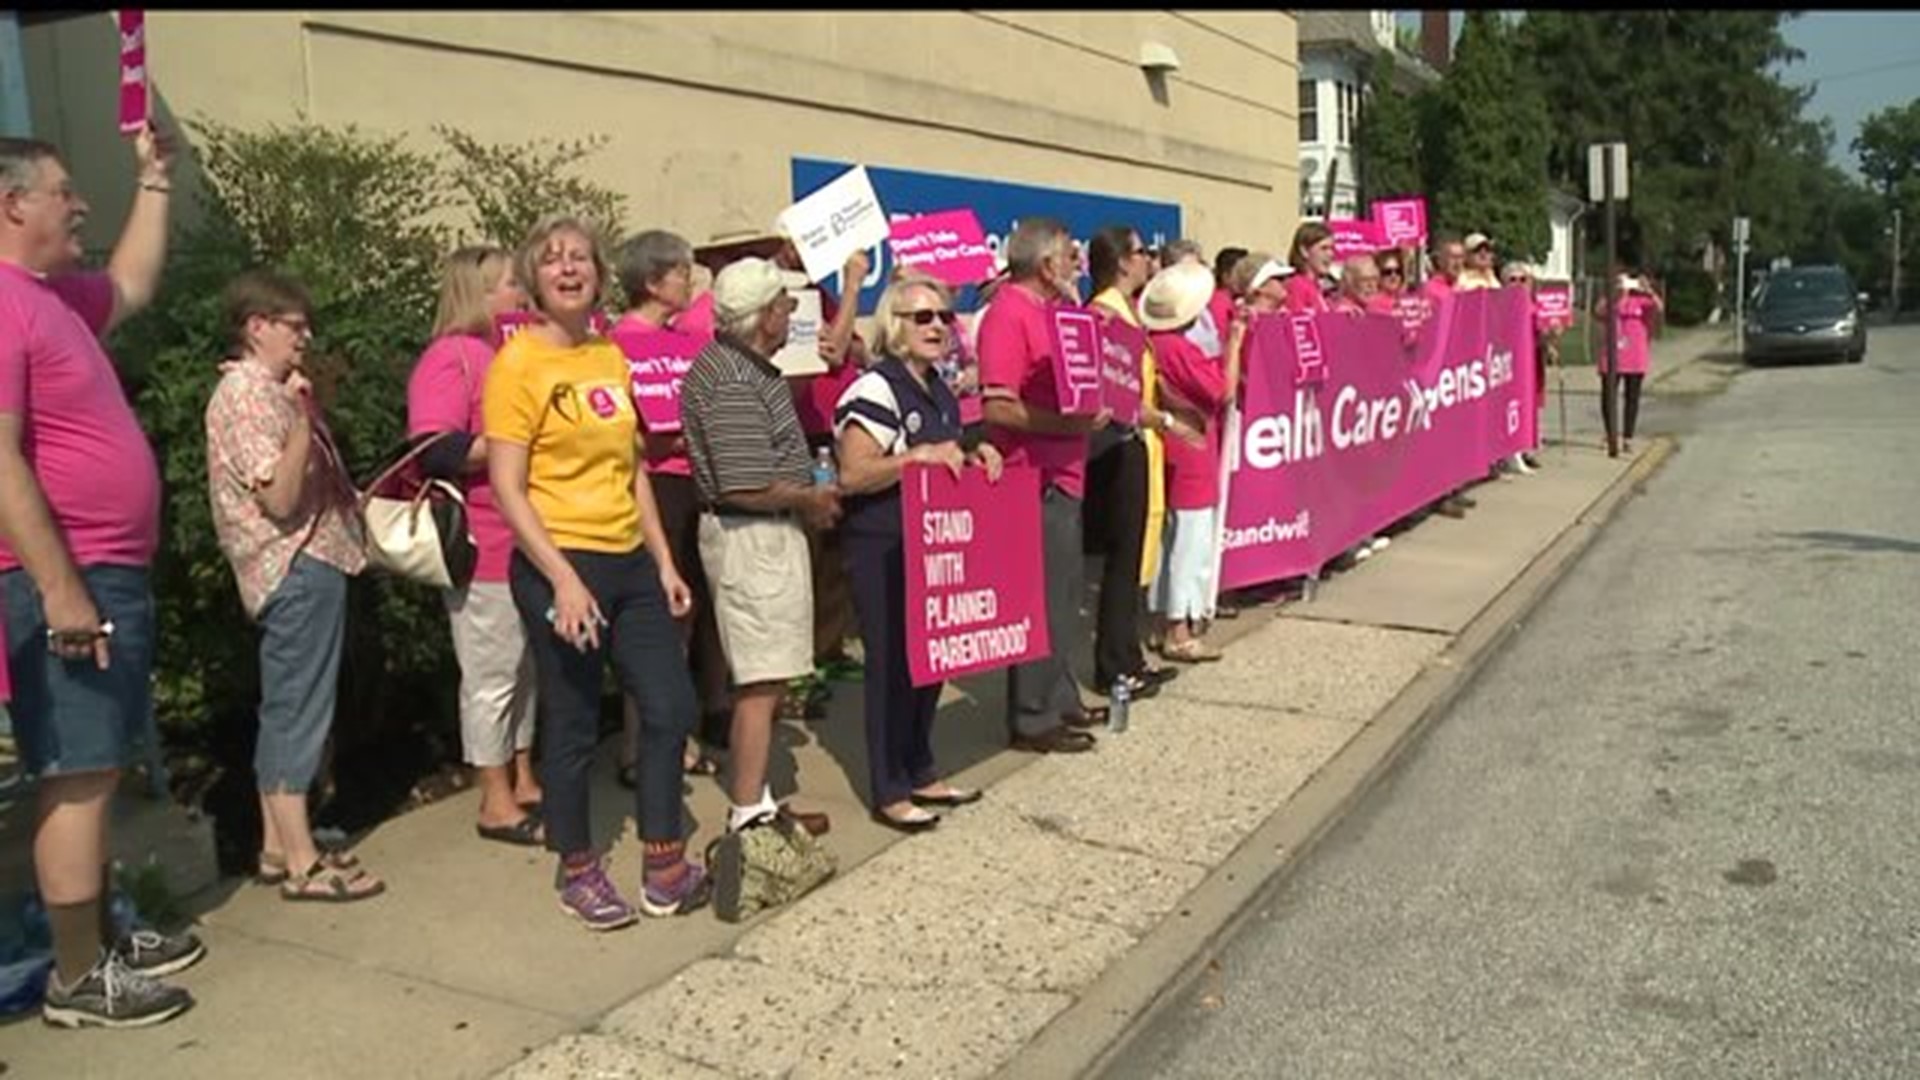 Women`s rights advocates take a stand for Planned Parenthood funding